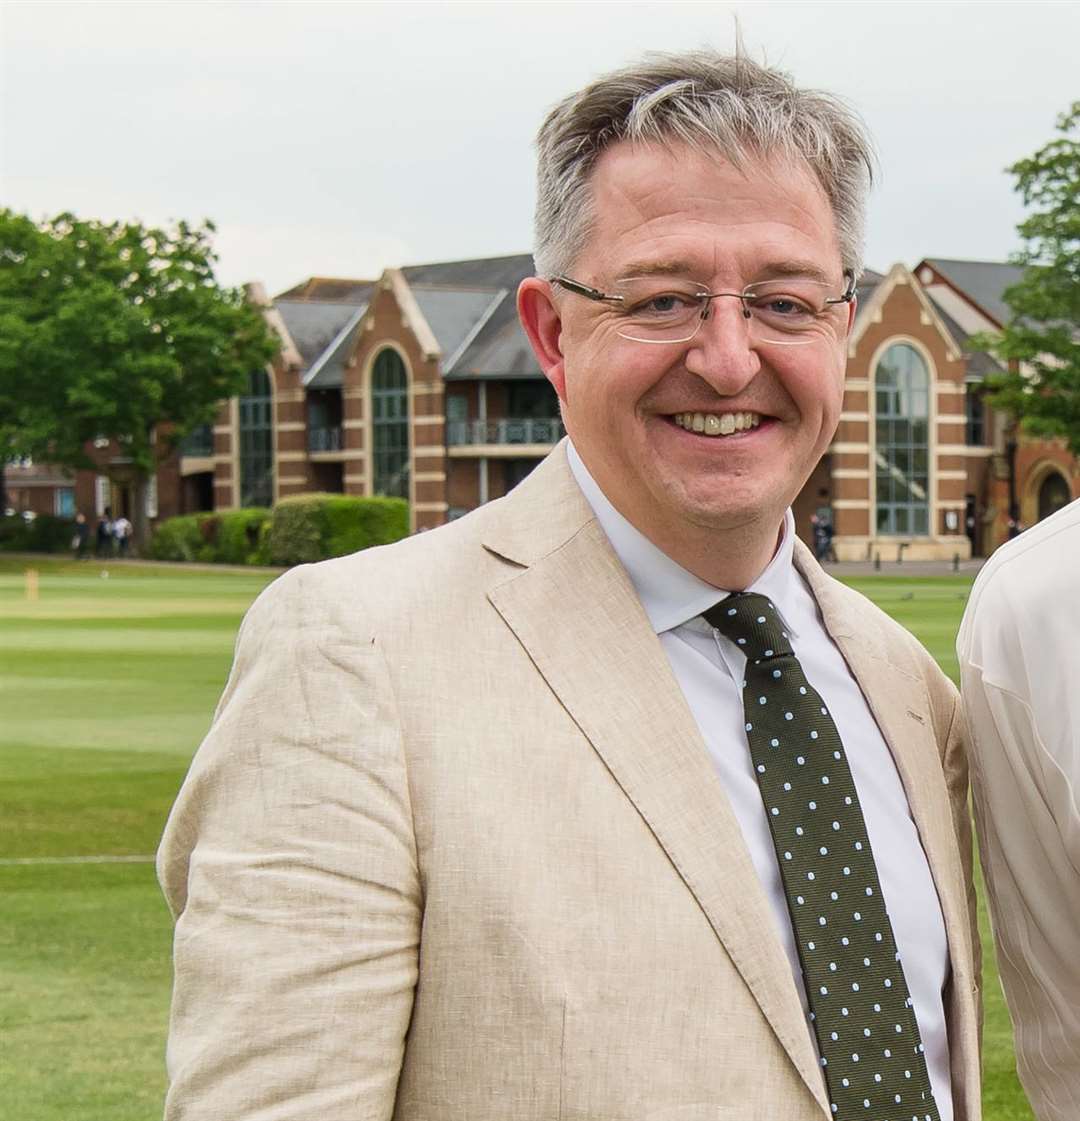 Tonbridge School head teacher James Priory responded to the allegations levelled against pupils at his school in a letter to alumni